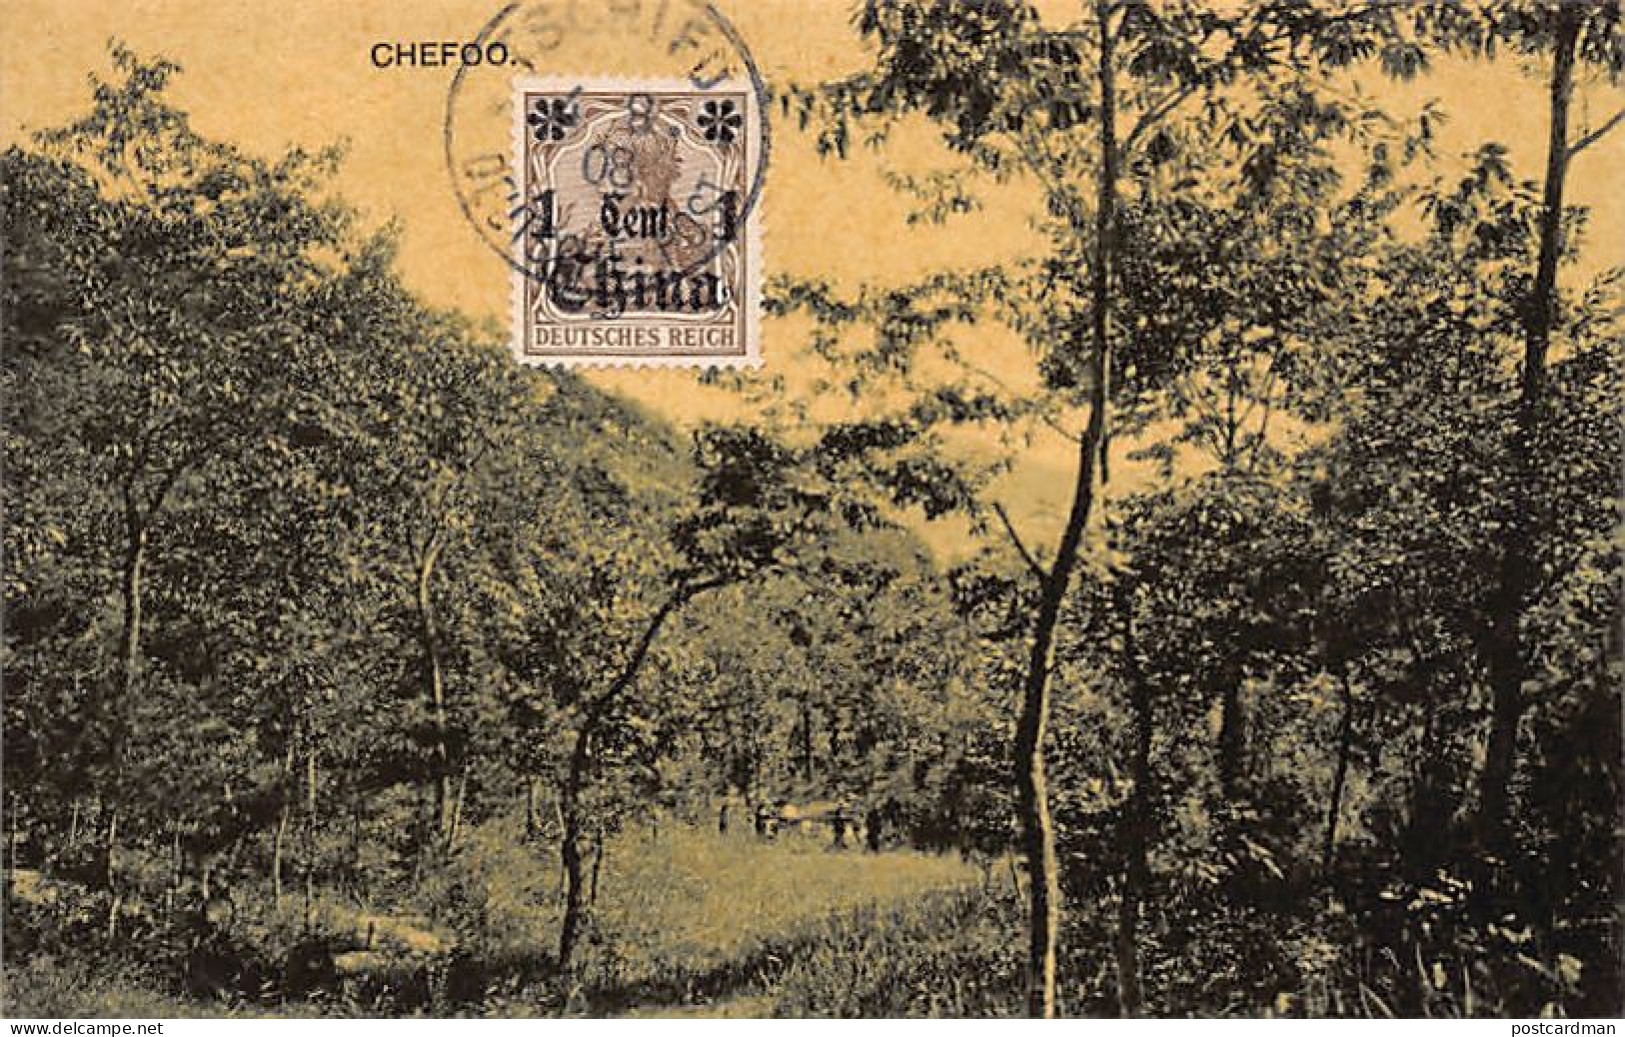 China - CHEFOO - Publ. H. Sietas & Co.  - Chine